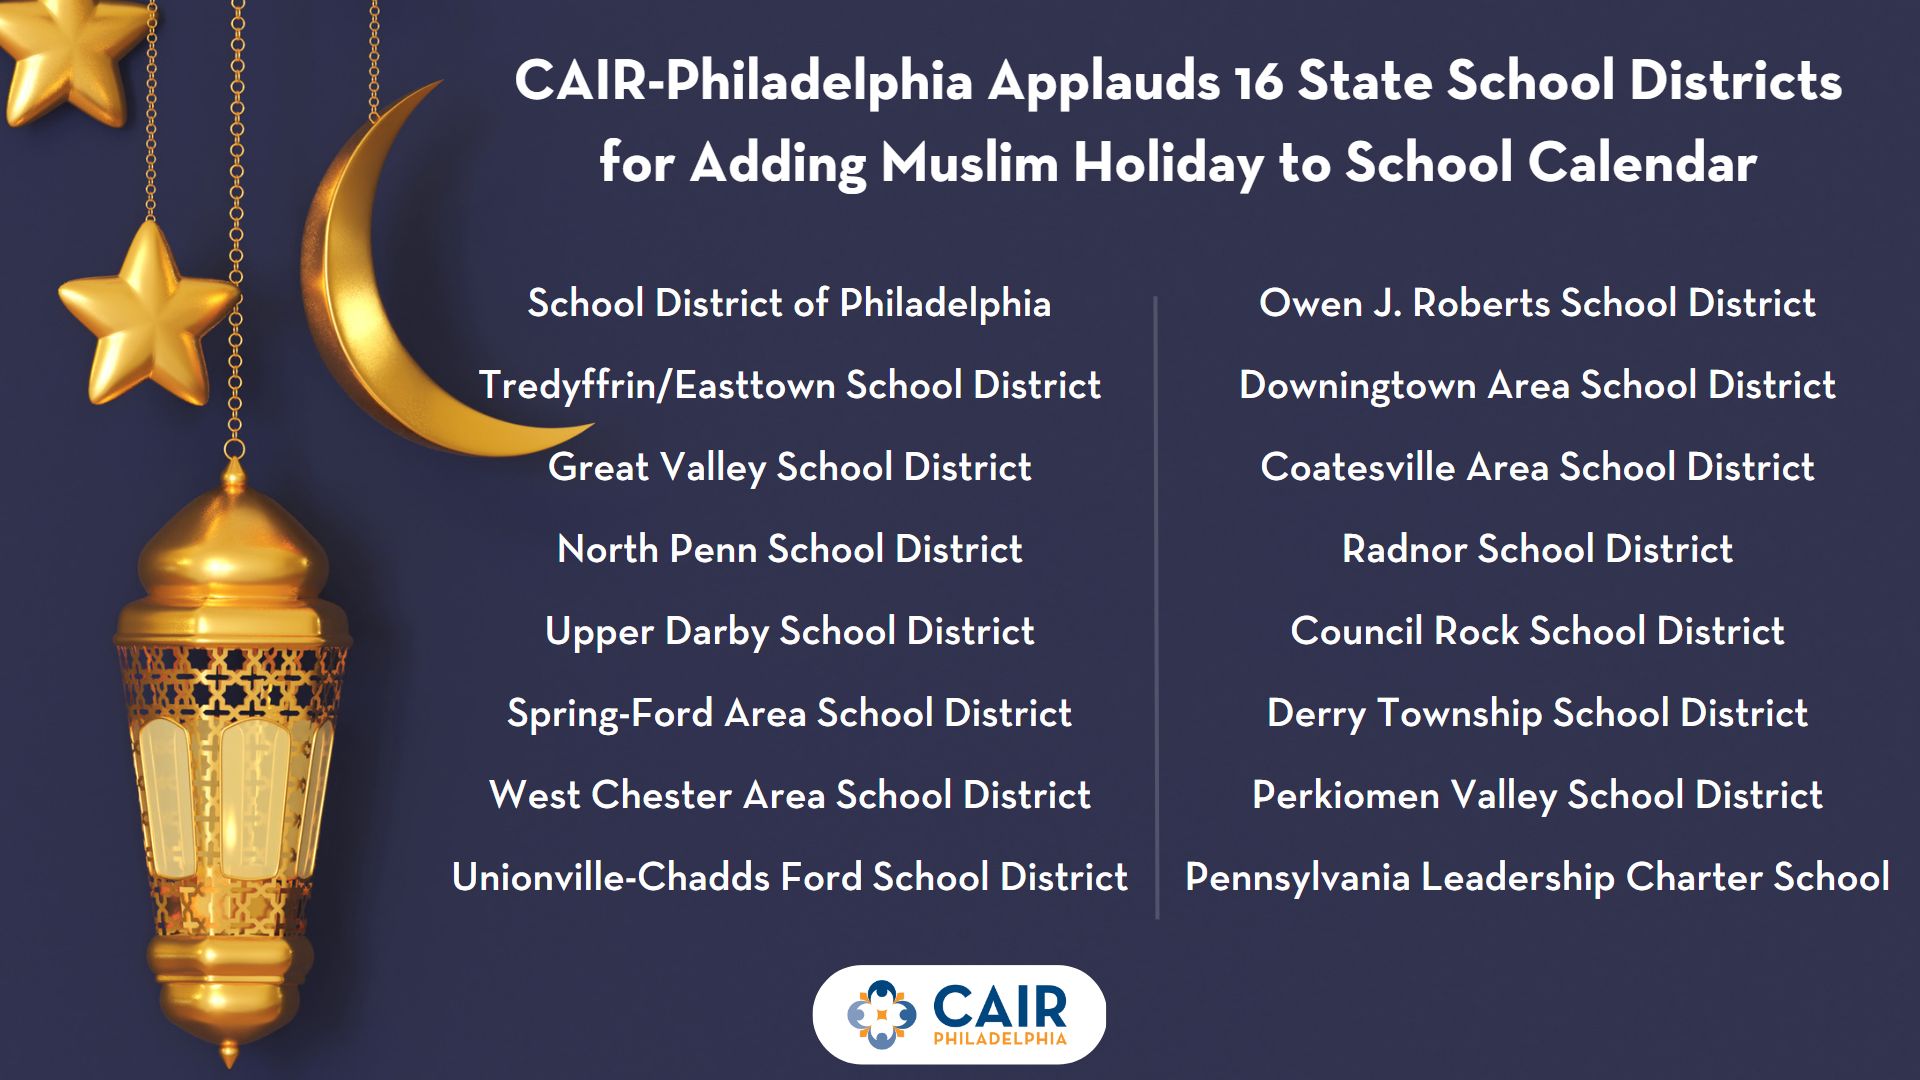 CAIRPhiladelphia Applauds 16 State School Districts for Adding Muslim